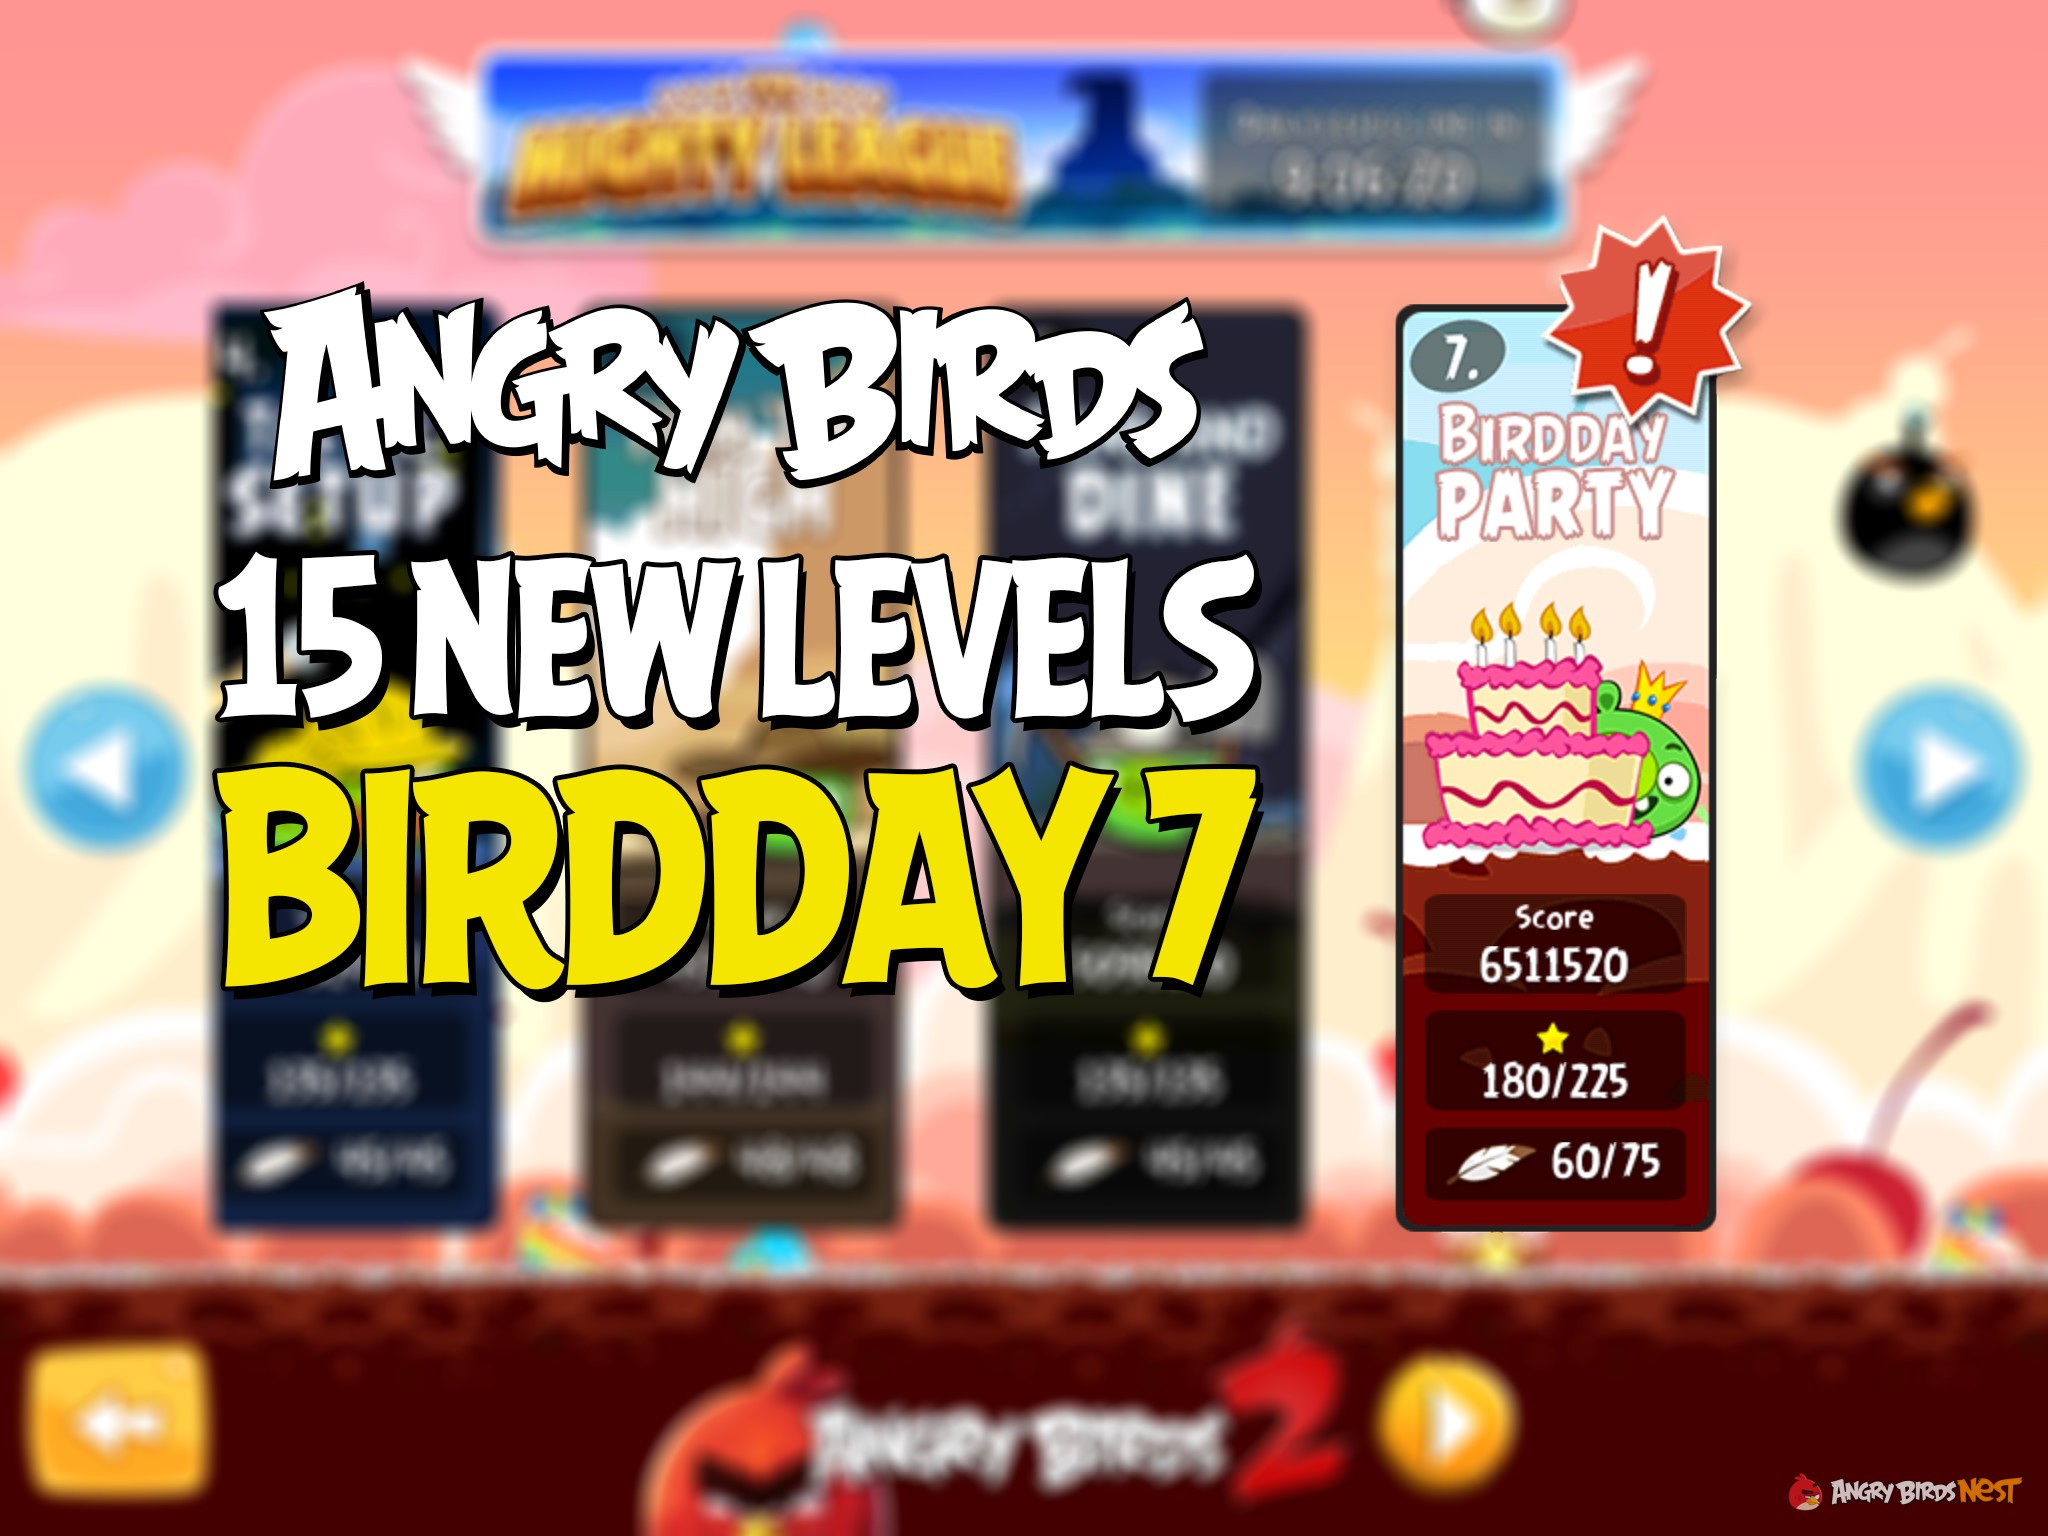 angry-birds-birdday-7-15-new-levels